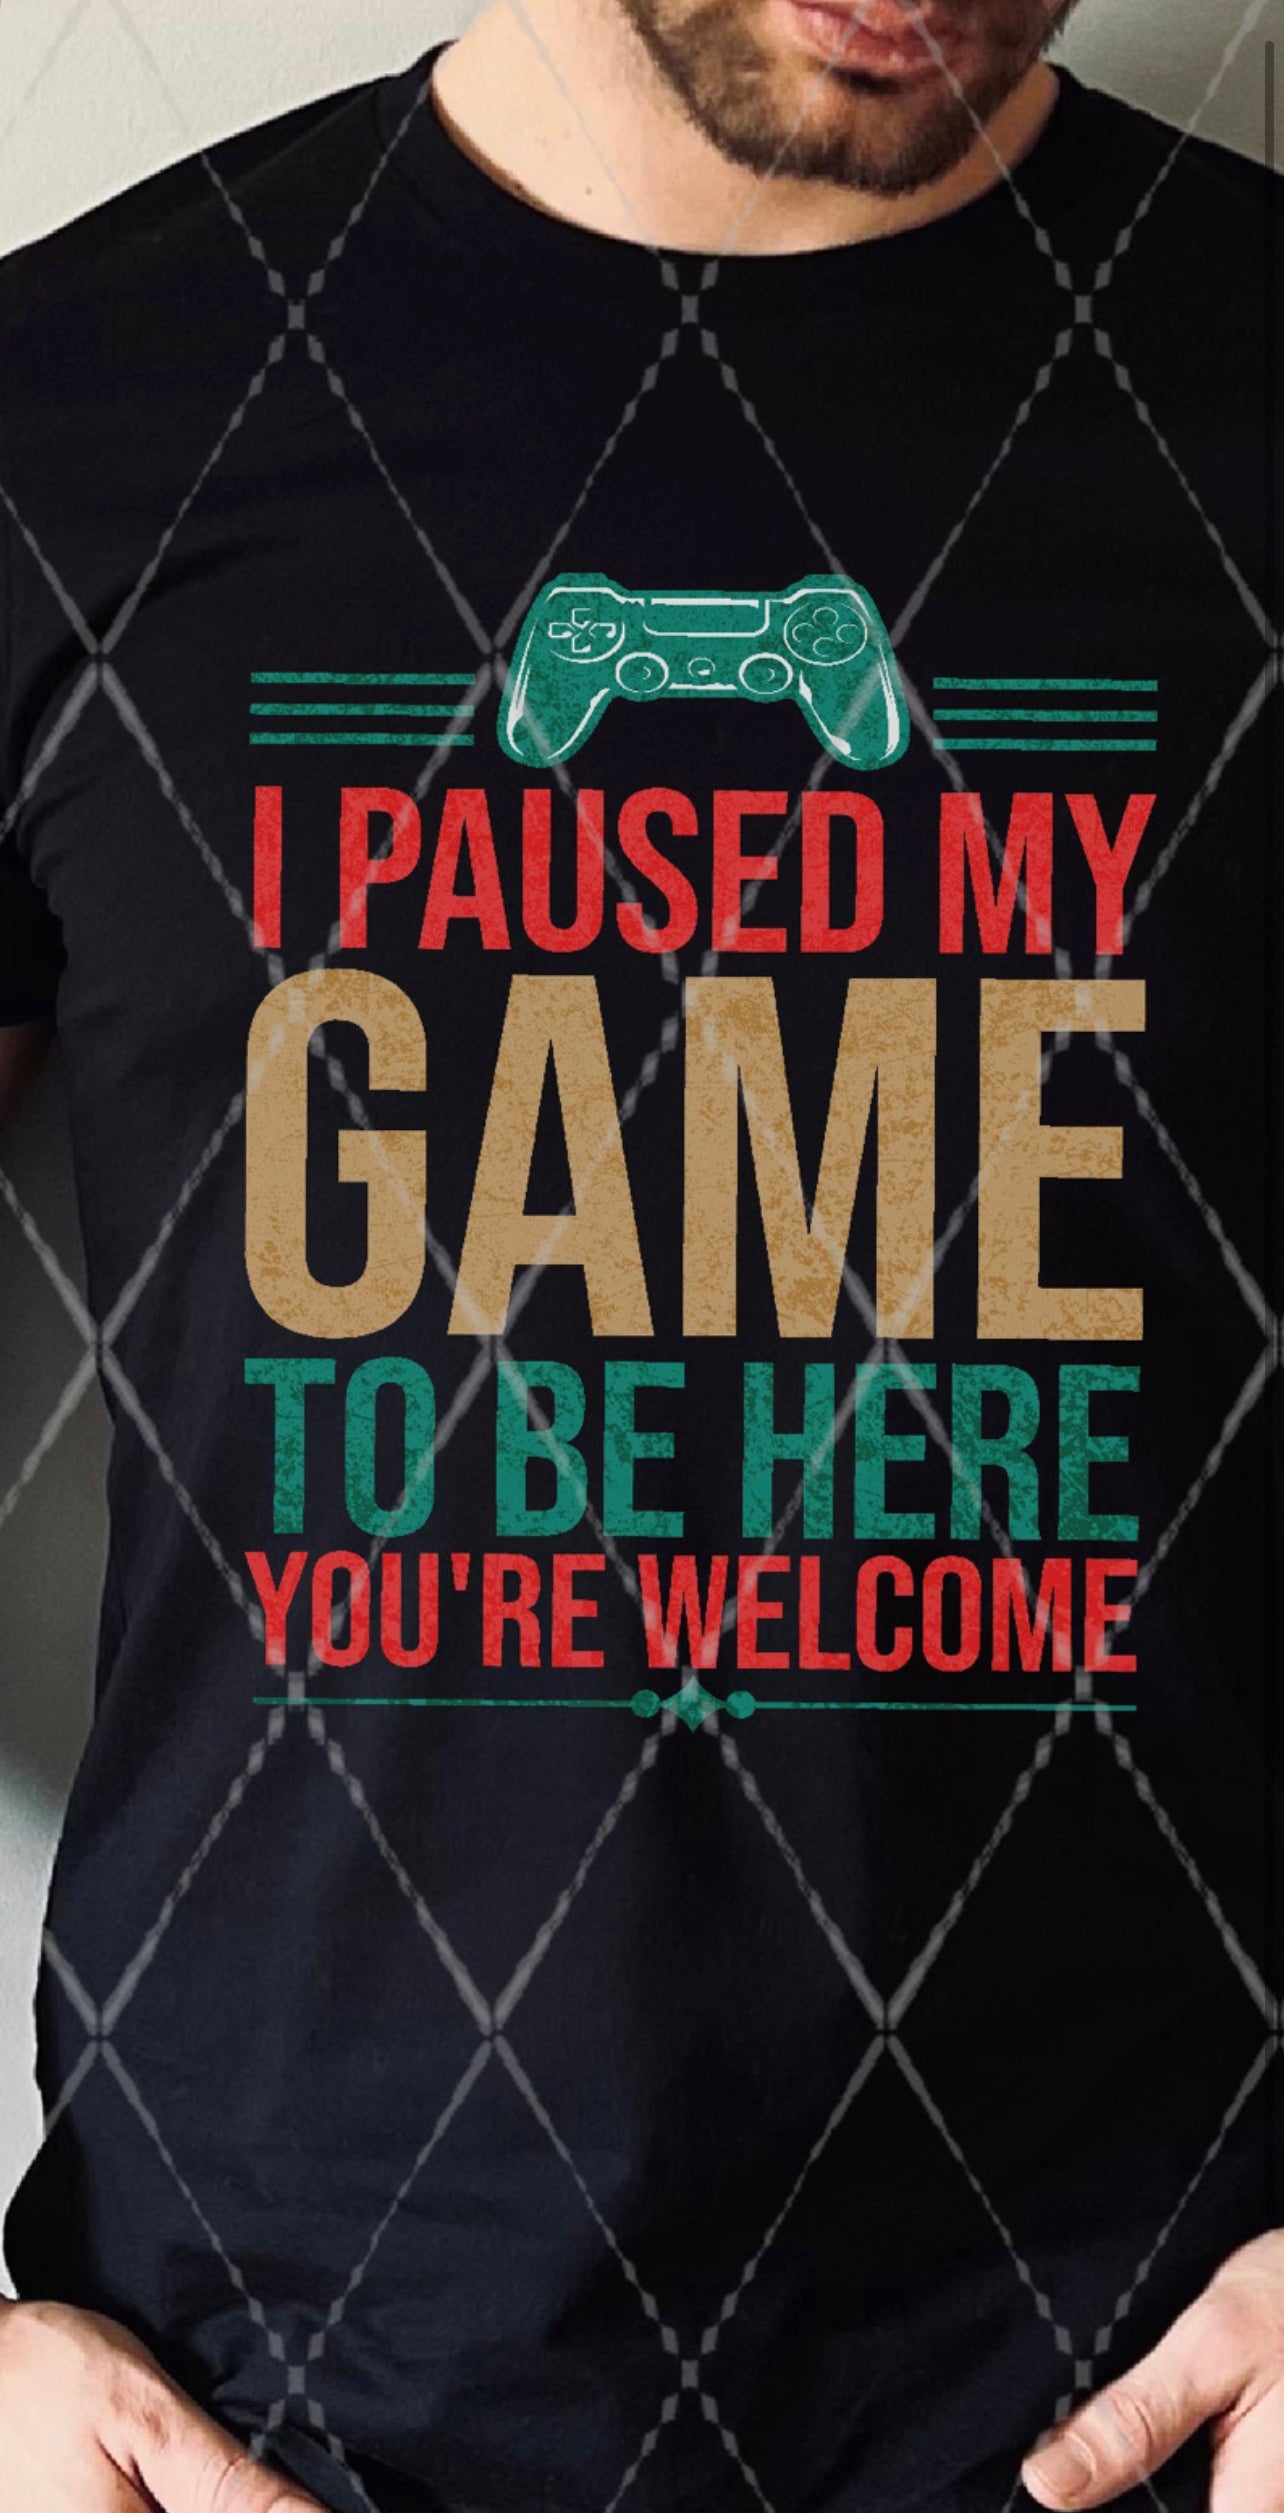 I paused my game to be here - AnnRose Boutique